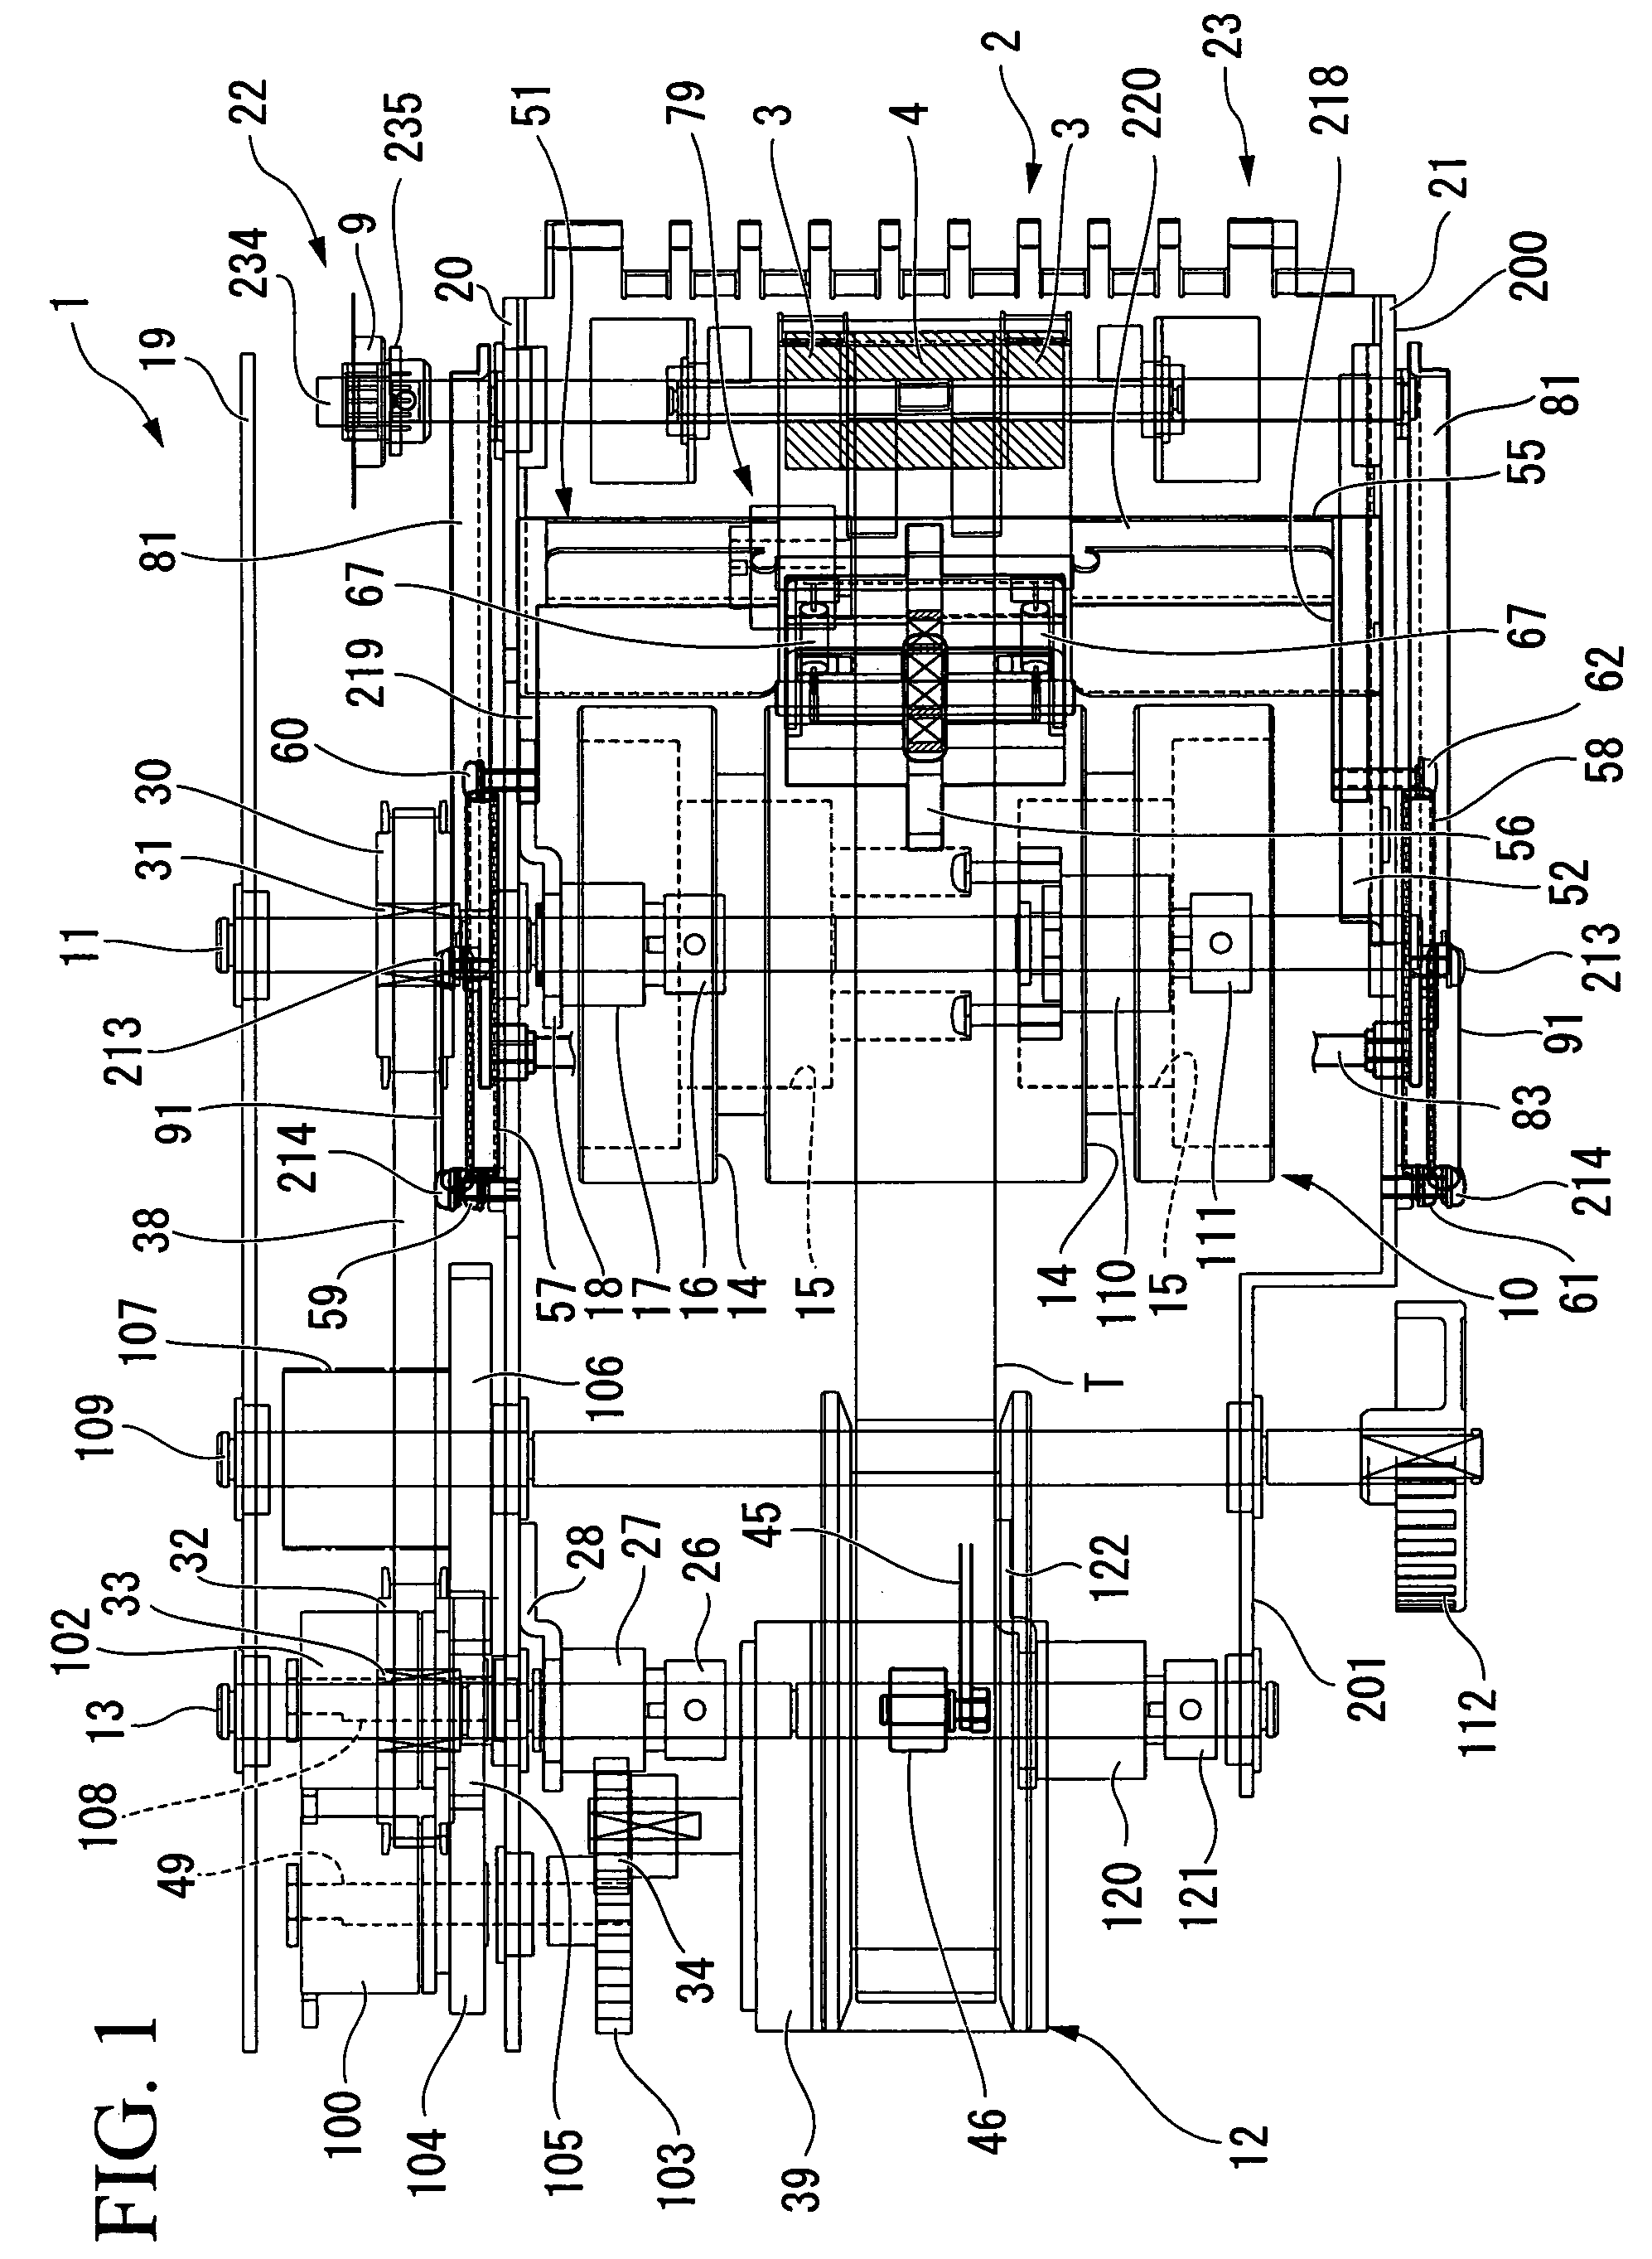 Paper sheet storage and payout device